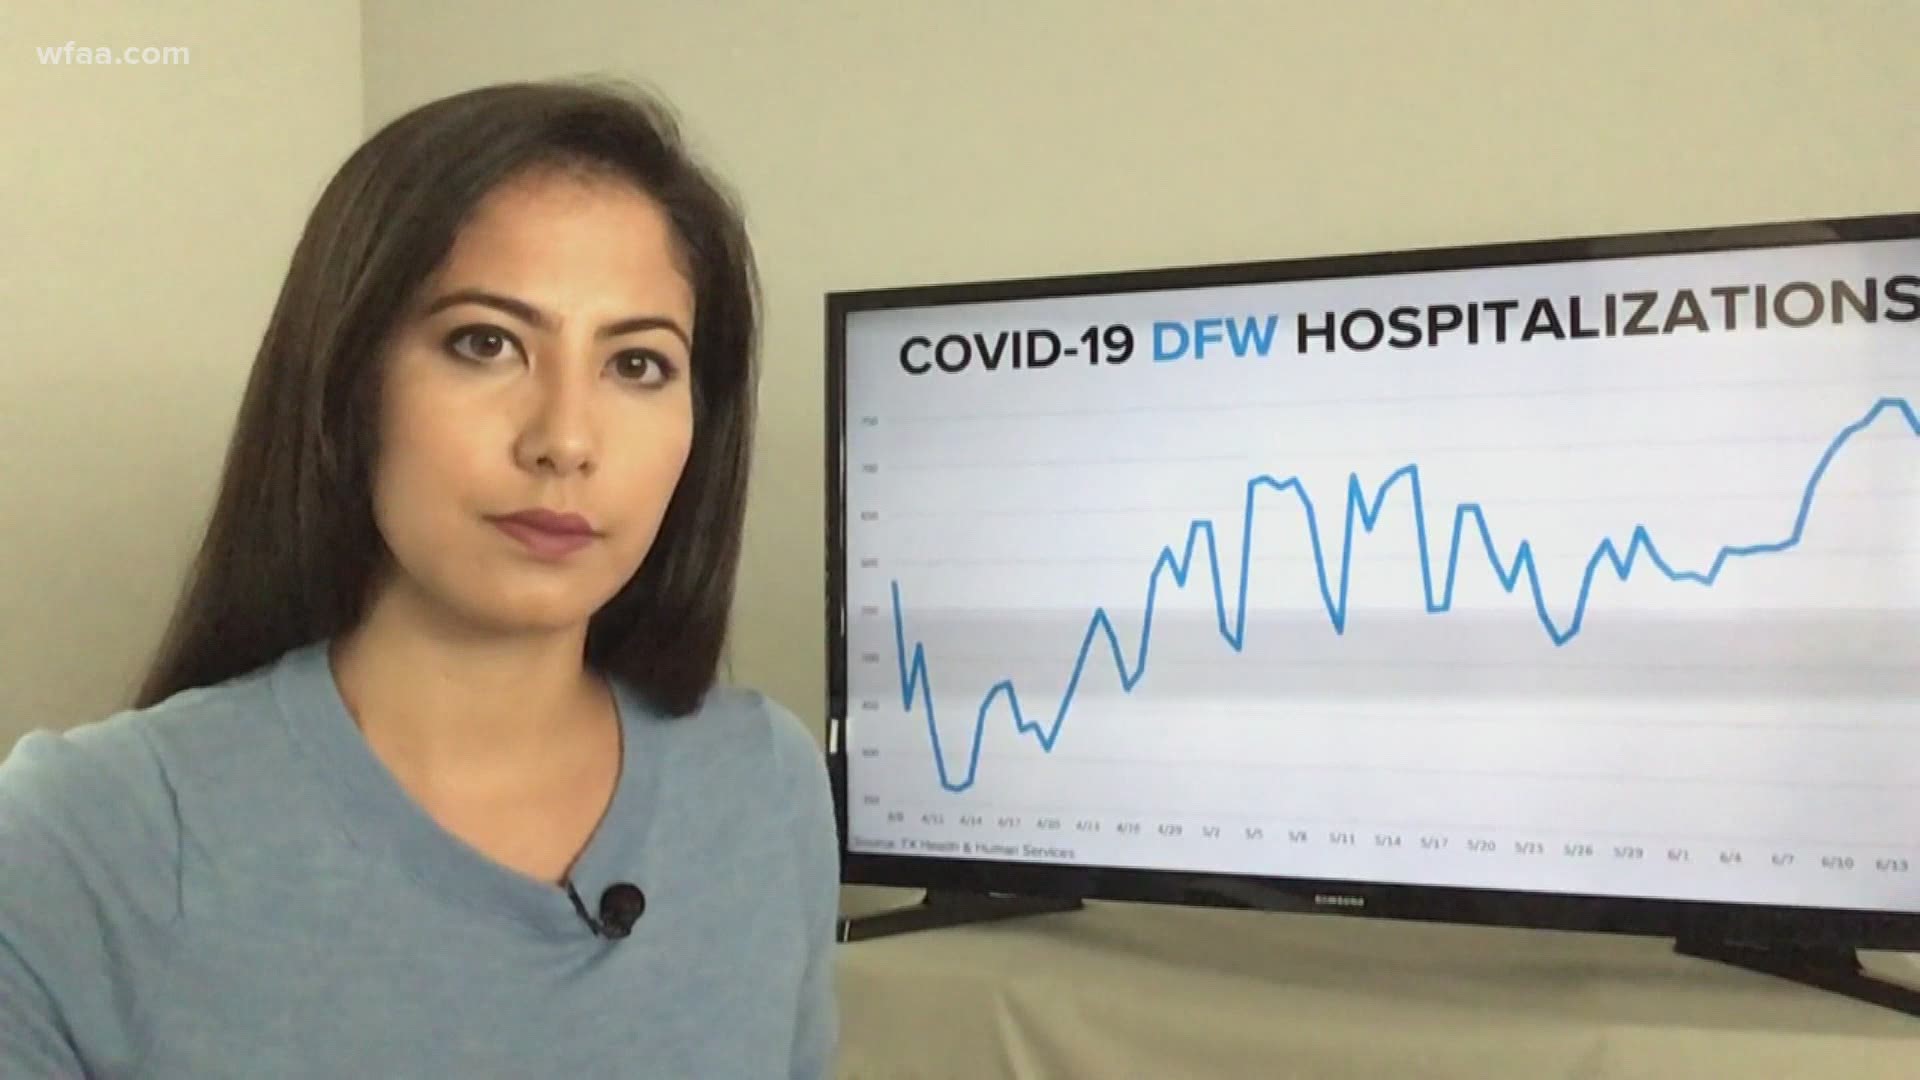 Hospitalizations related to COVID-19 have been going up lately in the Dallas-Fort Worth area.